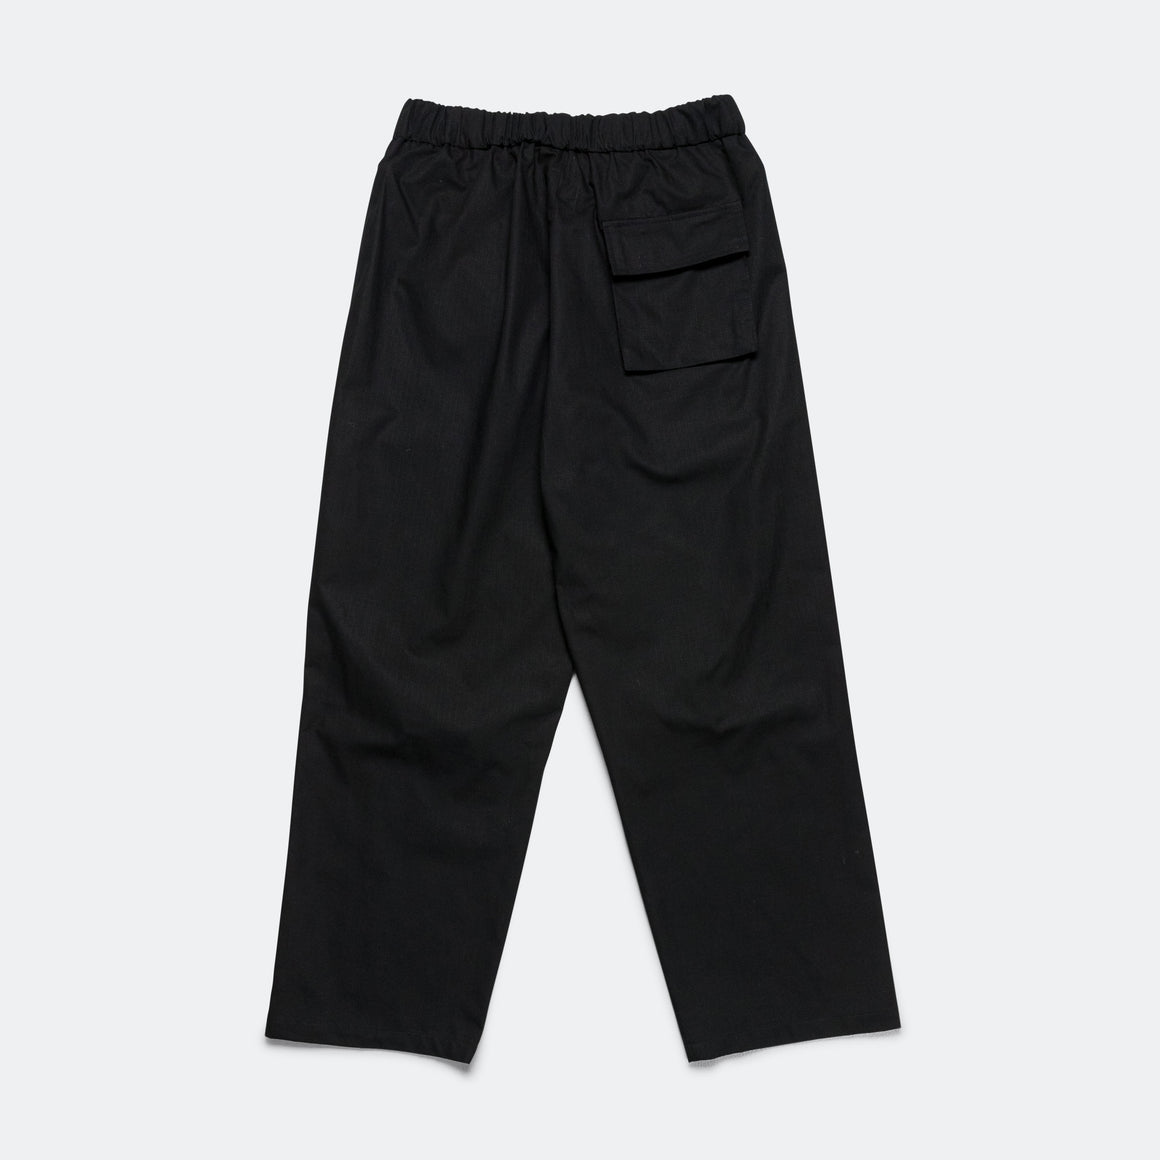 For The Homies - DOOM Fatigue Pant - Black - UP THERE